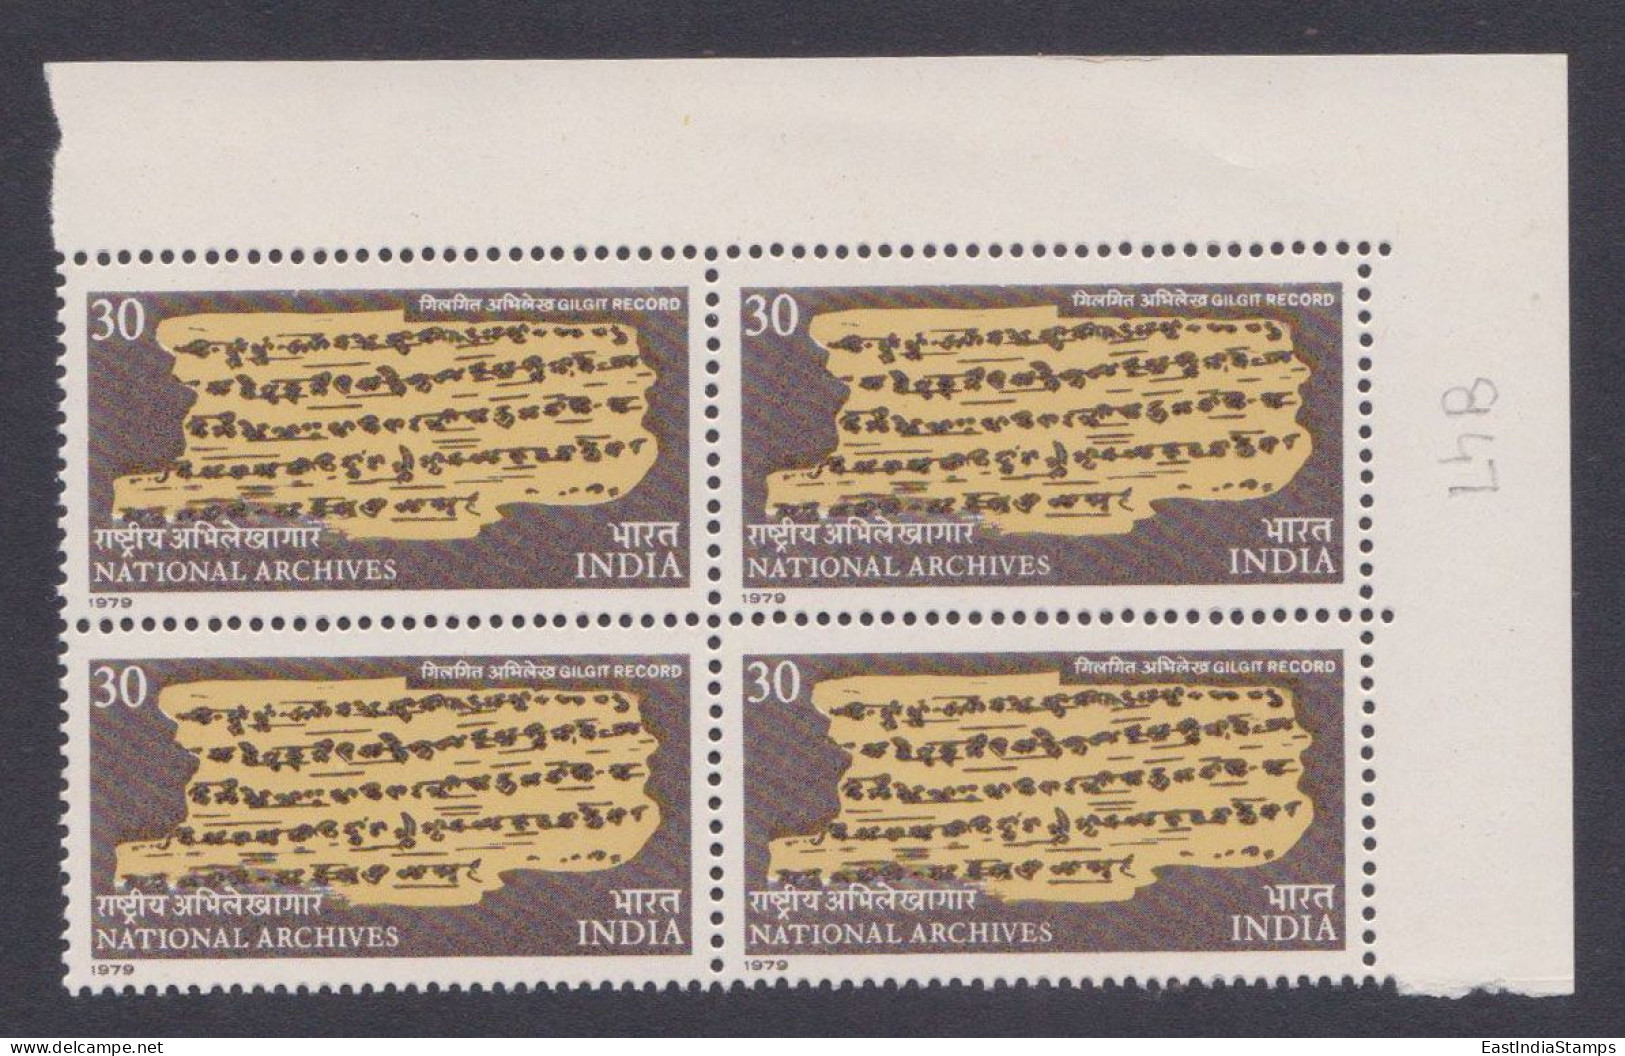 Inde India 1979 MNH National Archives, Archaeology, Gilgit Record, History, Artifacts, Block - Unused Stamps